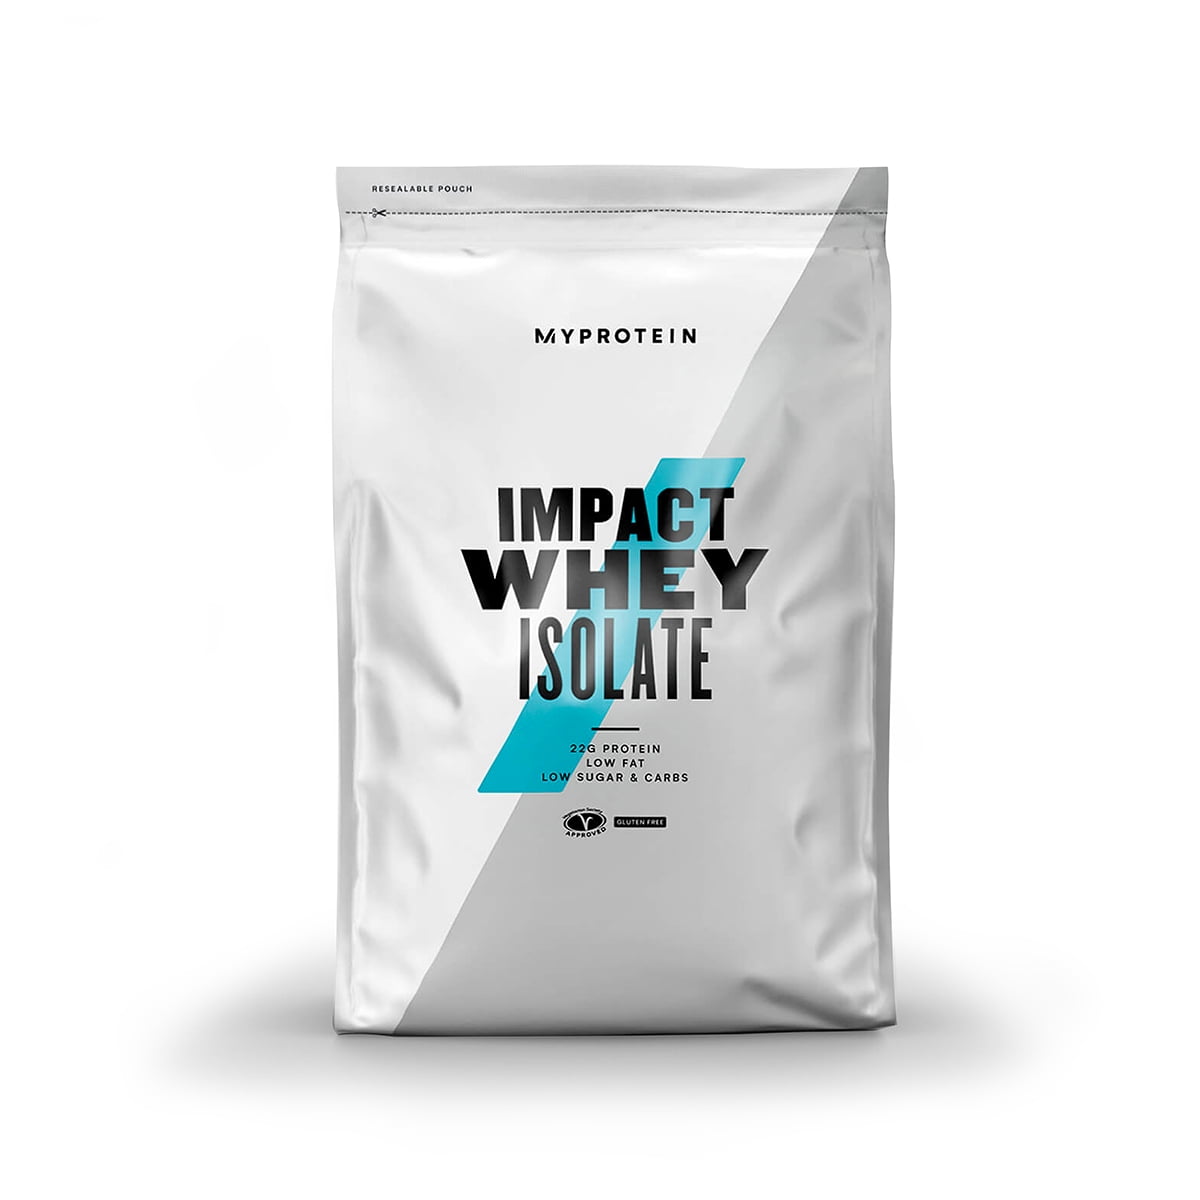 Myprotein Impact Whey Isolate - 5.5lbs Chocolate Smooth - Gluten Free  Protein Powder, Muscle Mass Protein Powder, Dietary Supplement for Weight  Loss, GMO & Soy Free, Whey Protein Powder 